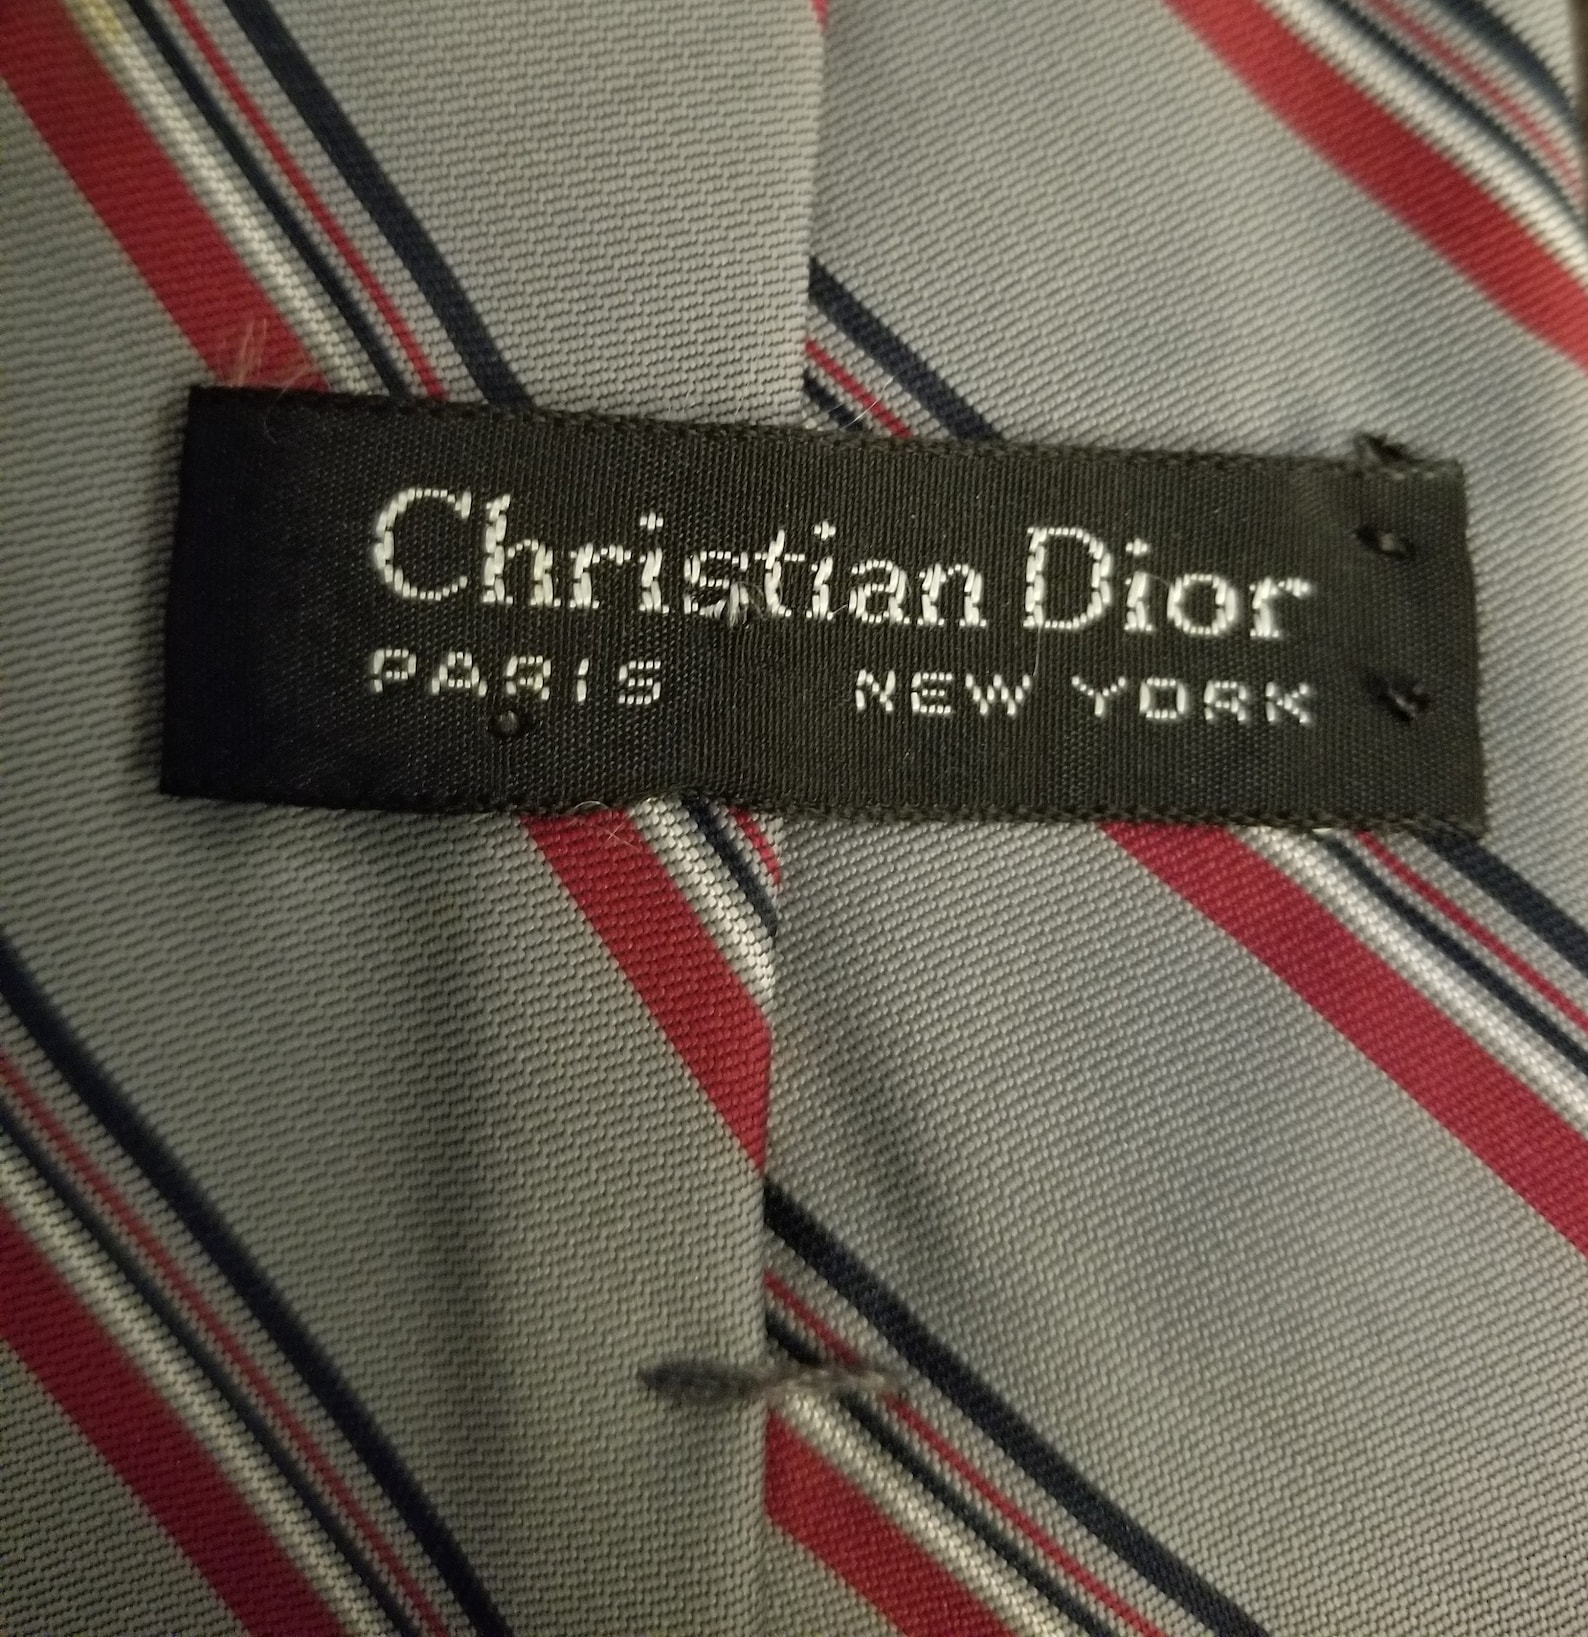 Christian Dior Vintage Black Label Tie Gray With Red Stripes | Etsy